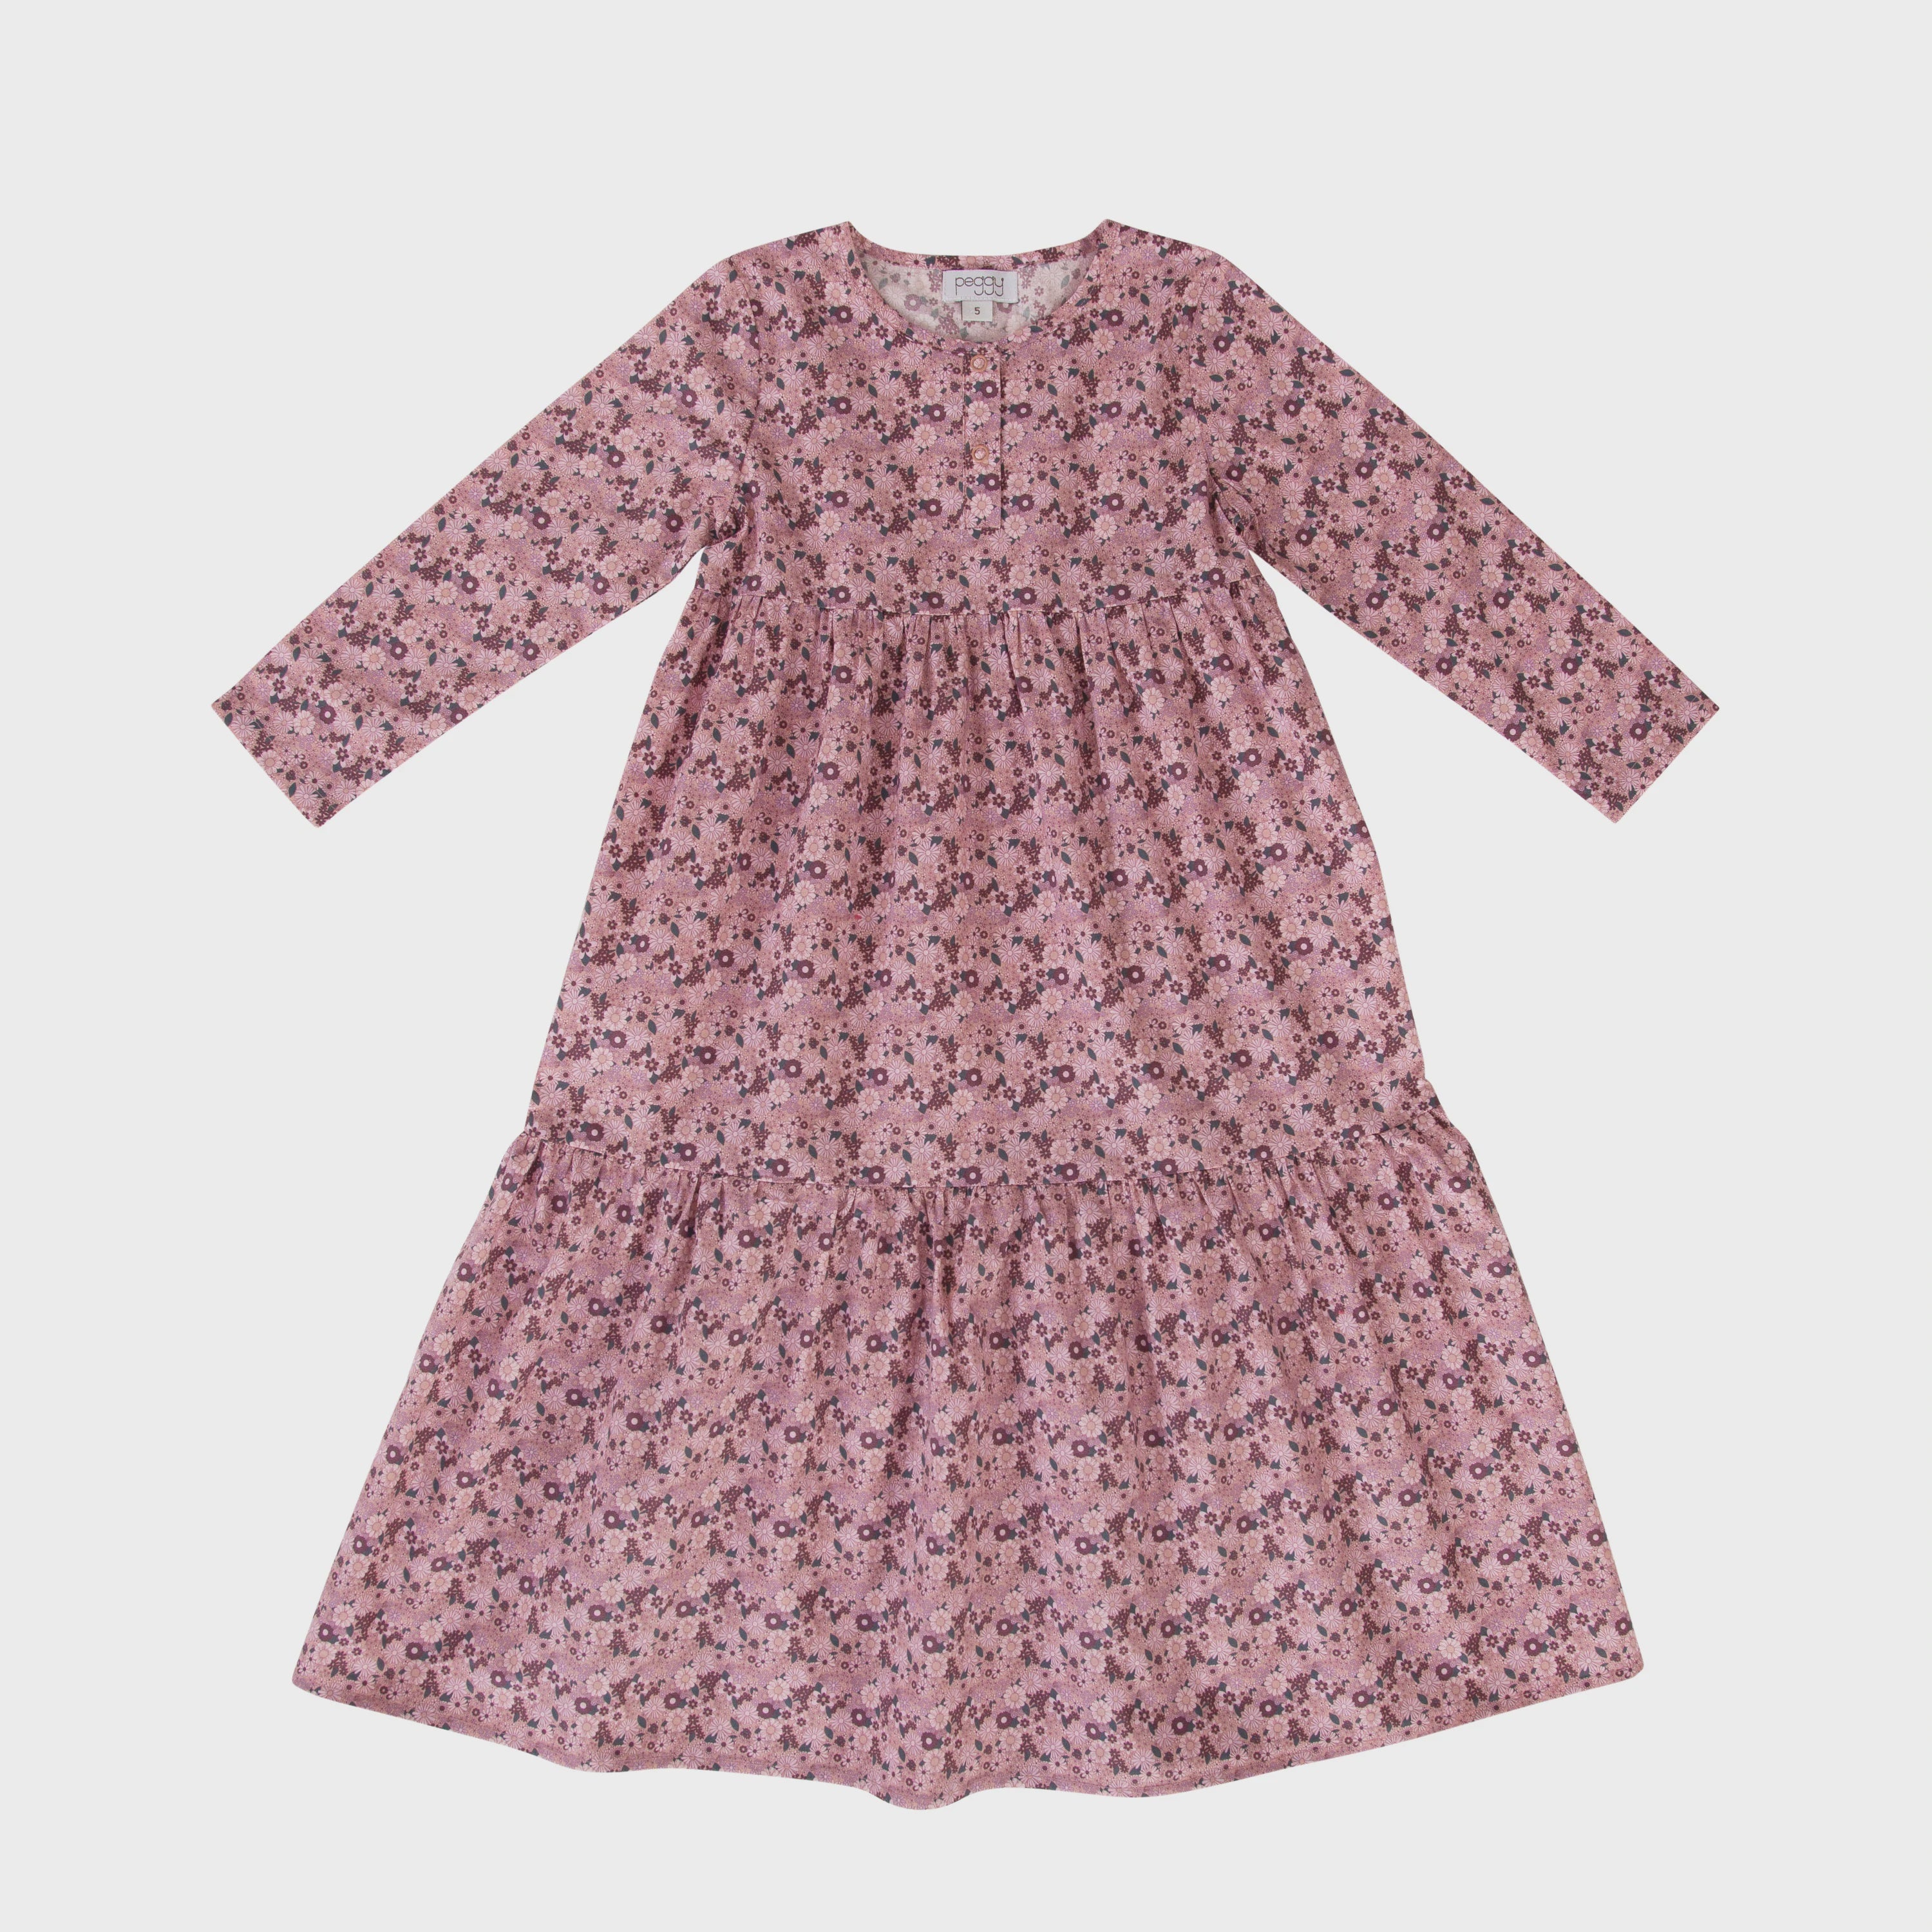 Peggy - Kingston Dress - Rose Ditzy Floral